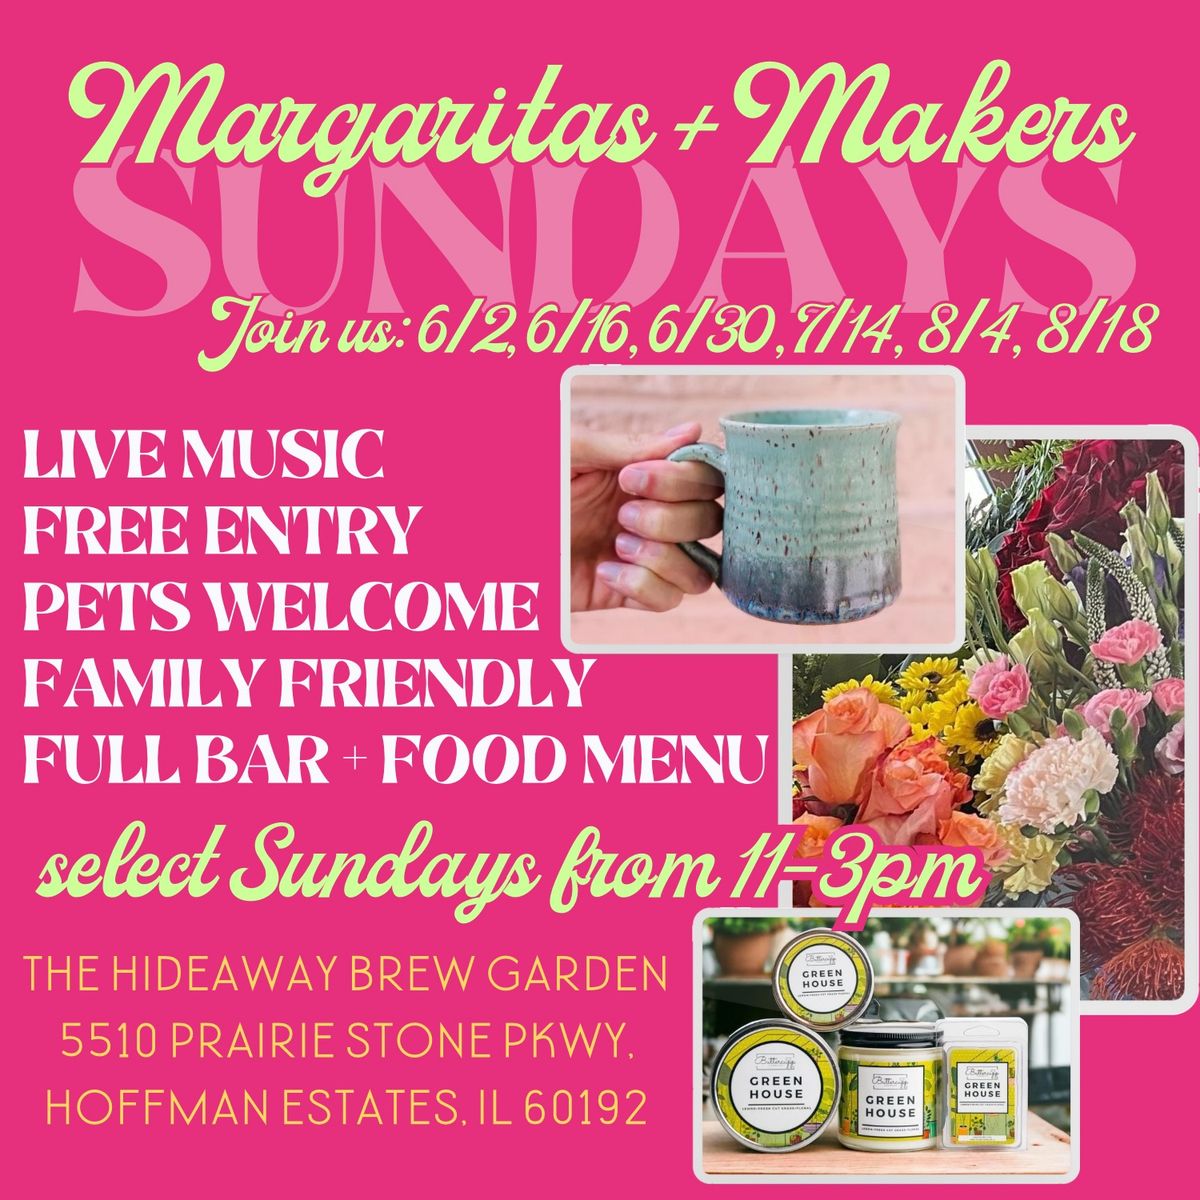 Margaritas & Makers featuring True Company Live